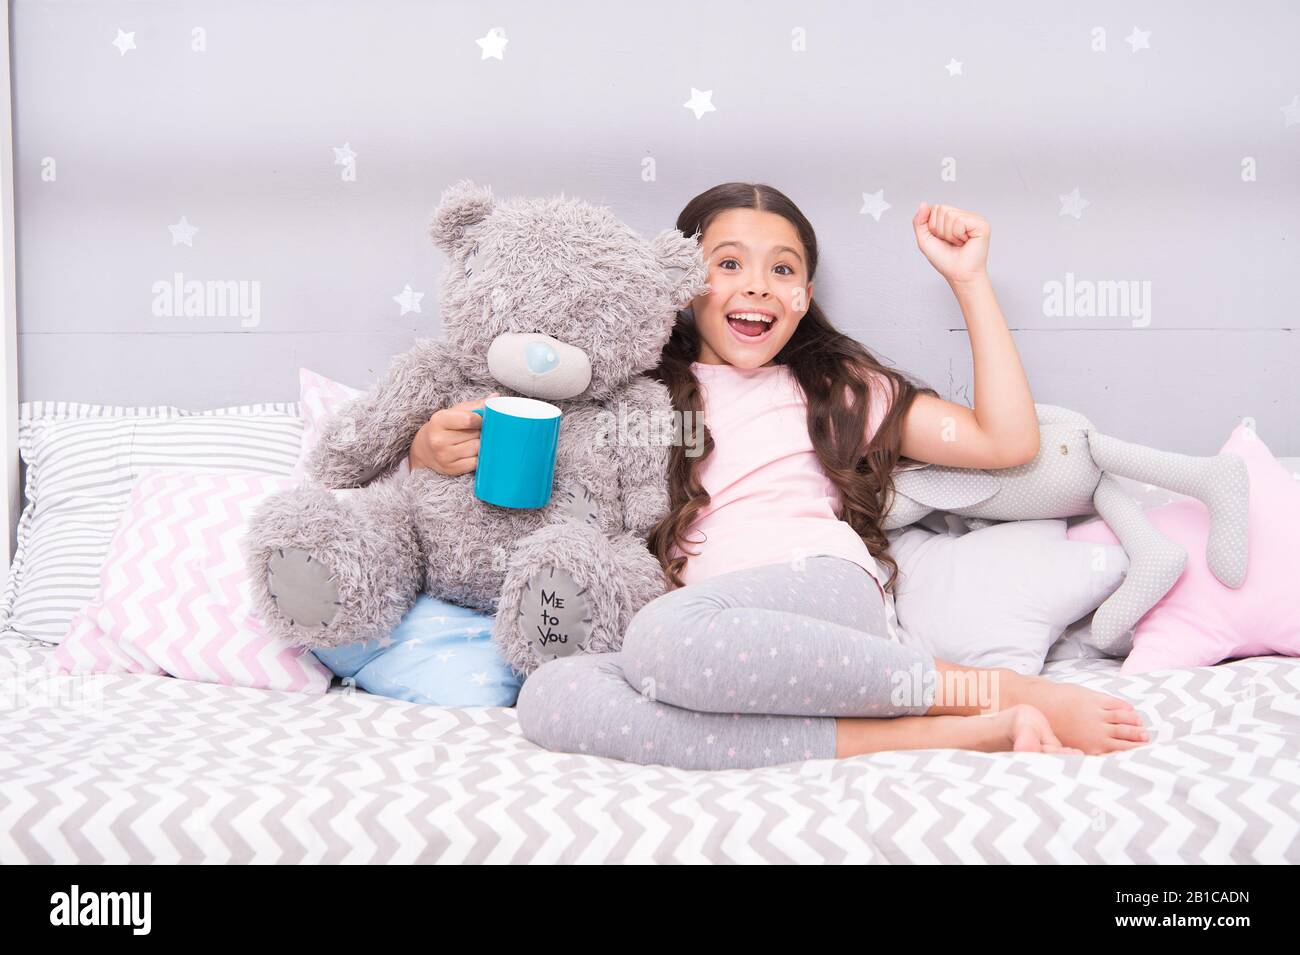 Little child hold mug. Girl in pajamas drinking tea. Relaxation before sleep. Drinking milk just before bed. Bedtime beverage. Hot milk before sleep. Health Benefits Drinking water before bed. Stock Photo